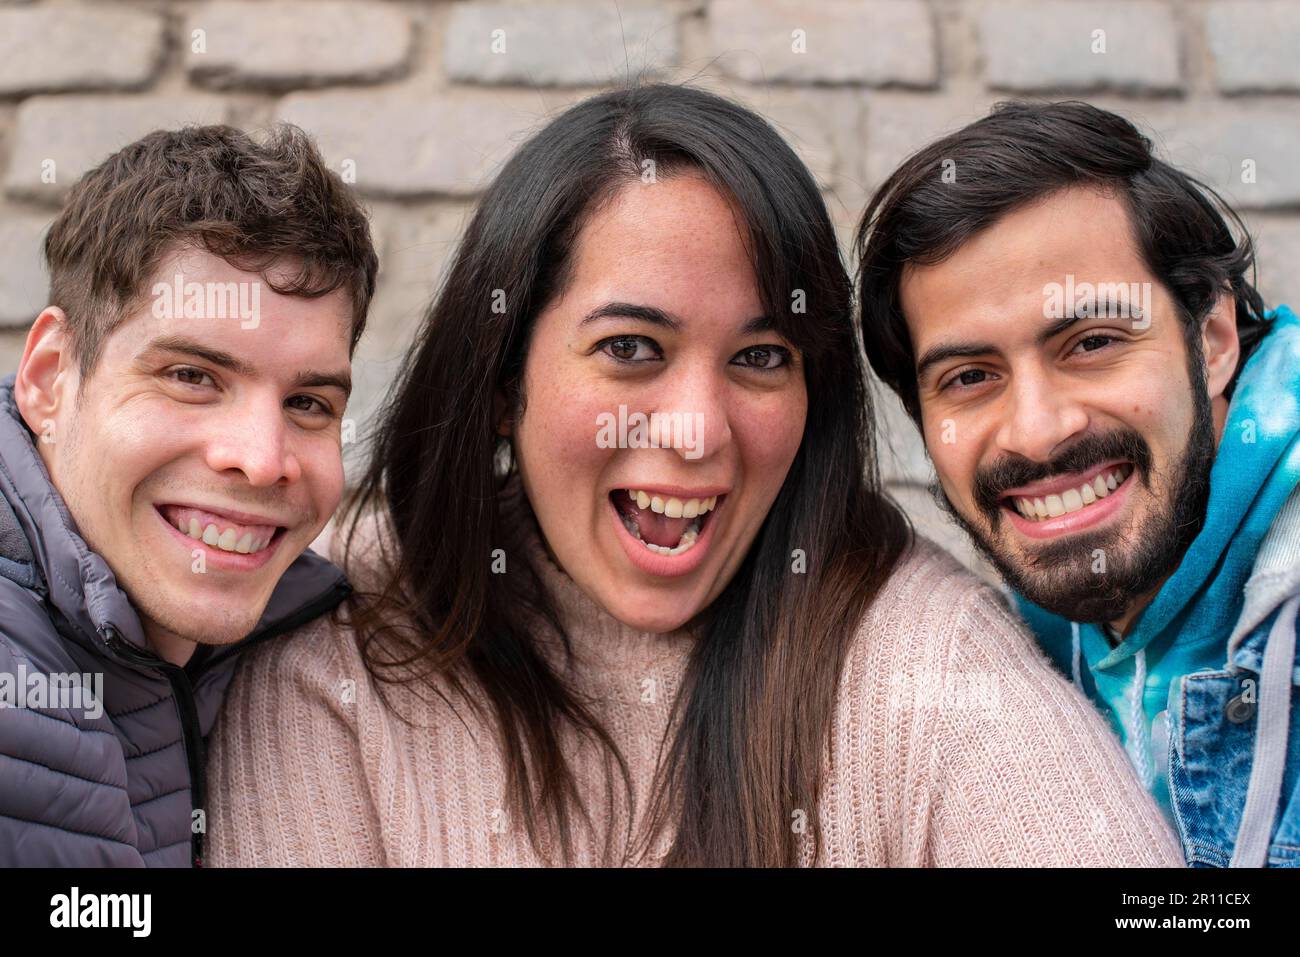 Portrait of three smiling friends looking at the camera Stock Photo